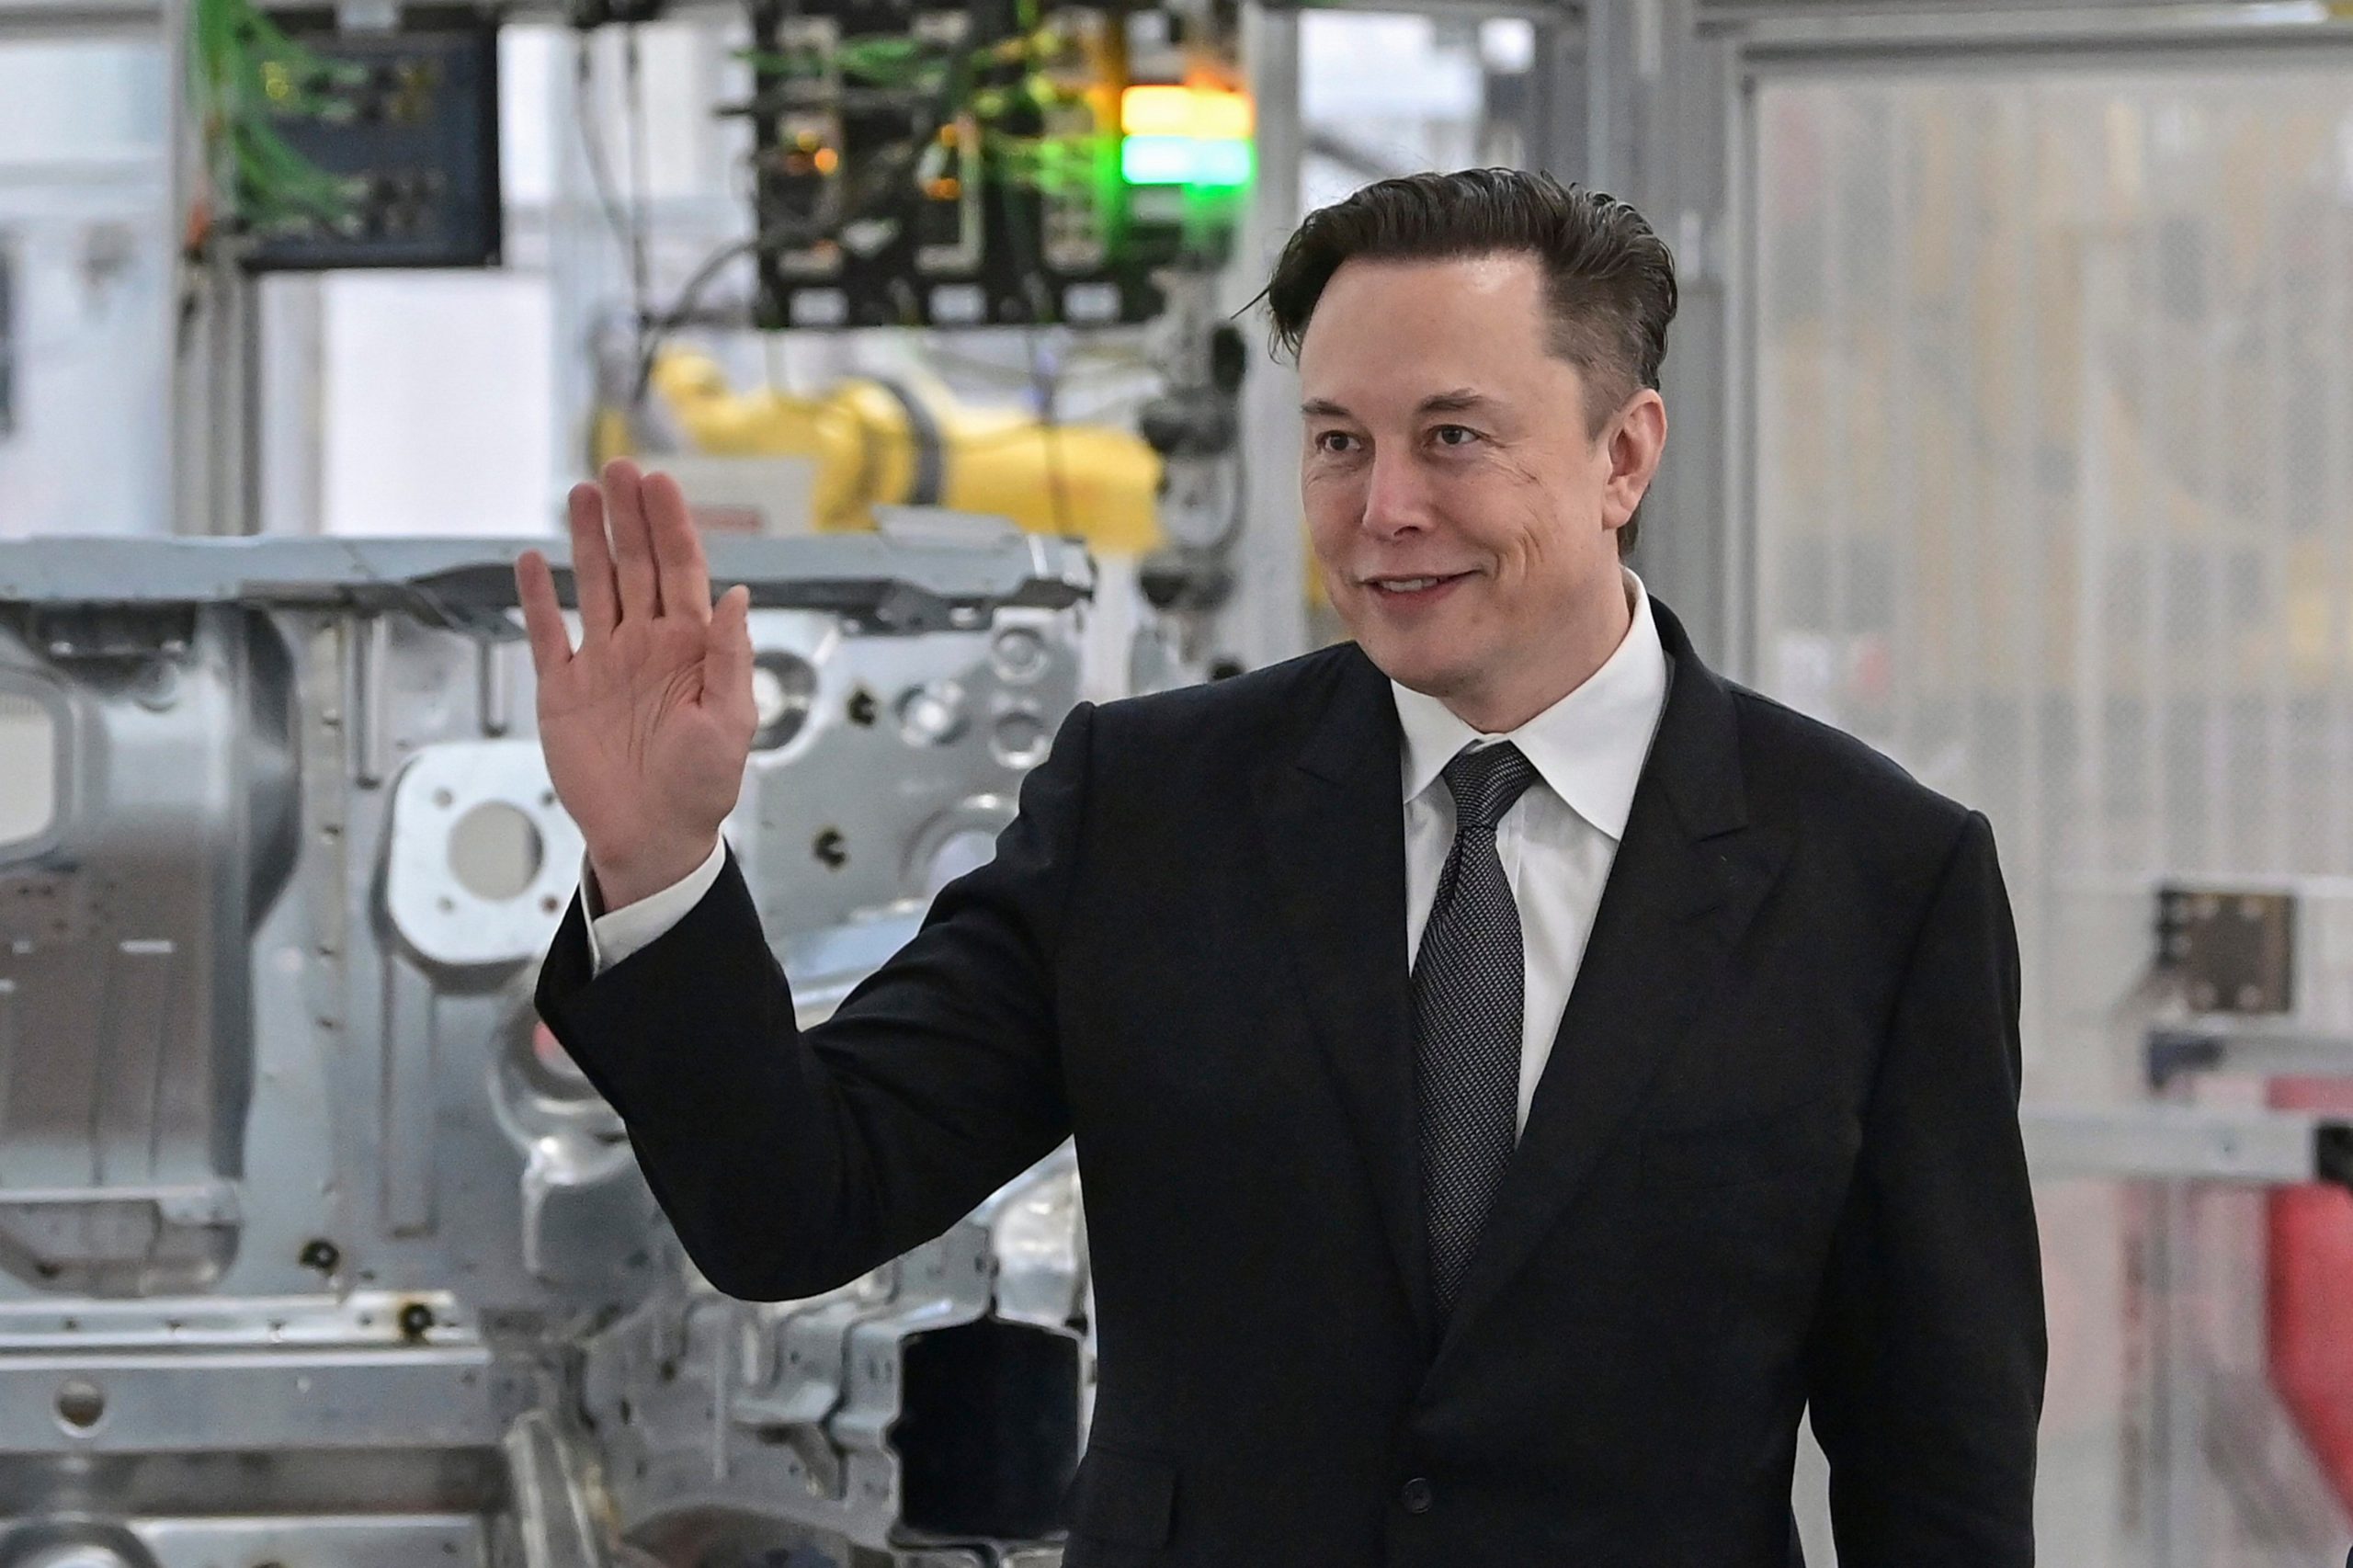 World Economic Forum says it didn’t invite Elon Musk despite his claims to the contrary